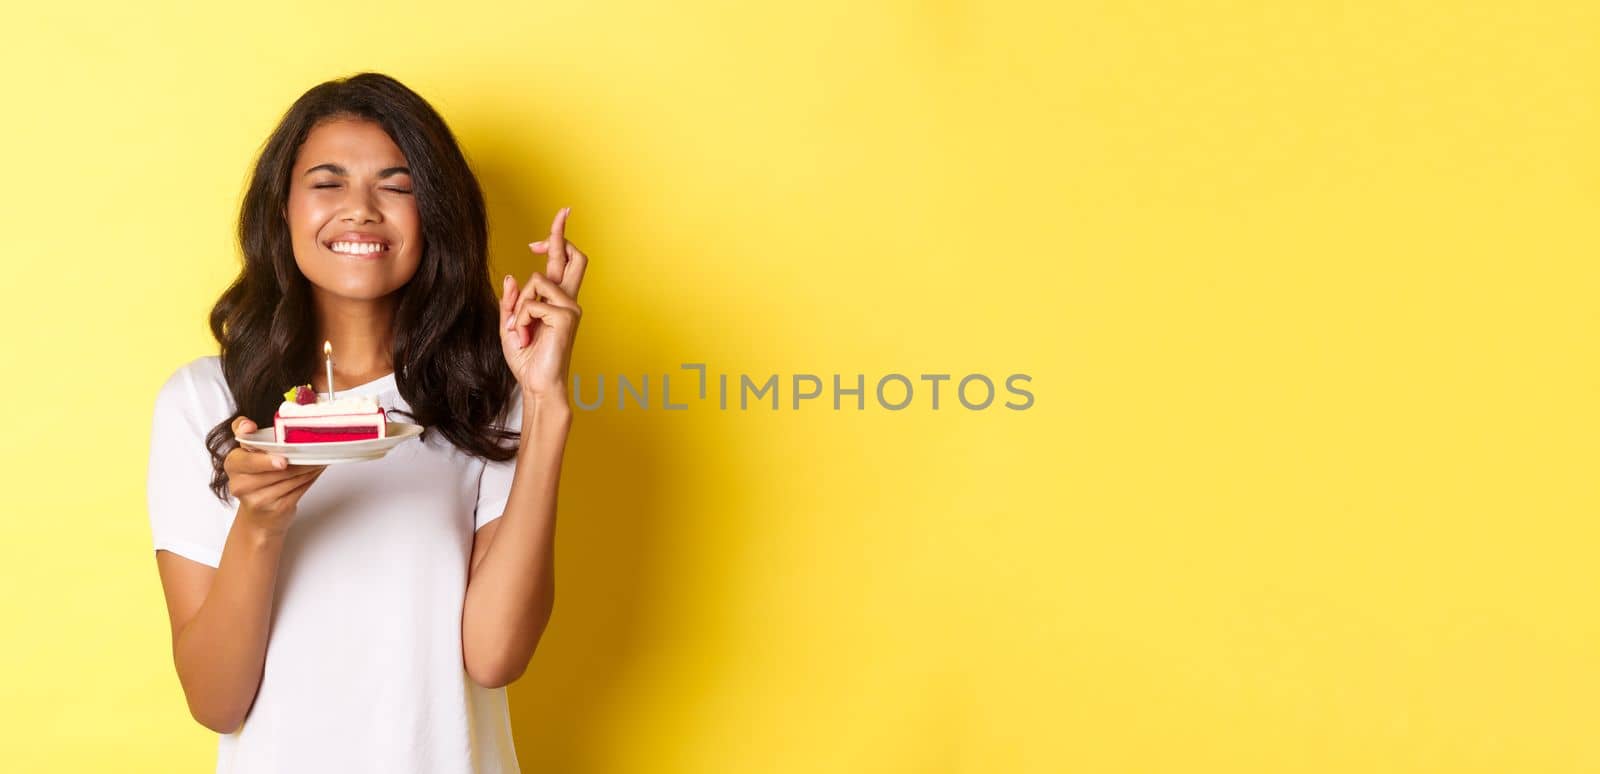 Portrait of cute african-american woman, close eyes and smiling, crossing fingers to make wish on birthday cake, celebrating b-day, standing over yellow background.